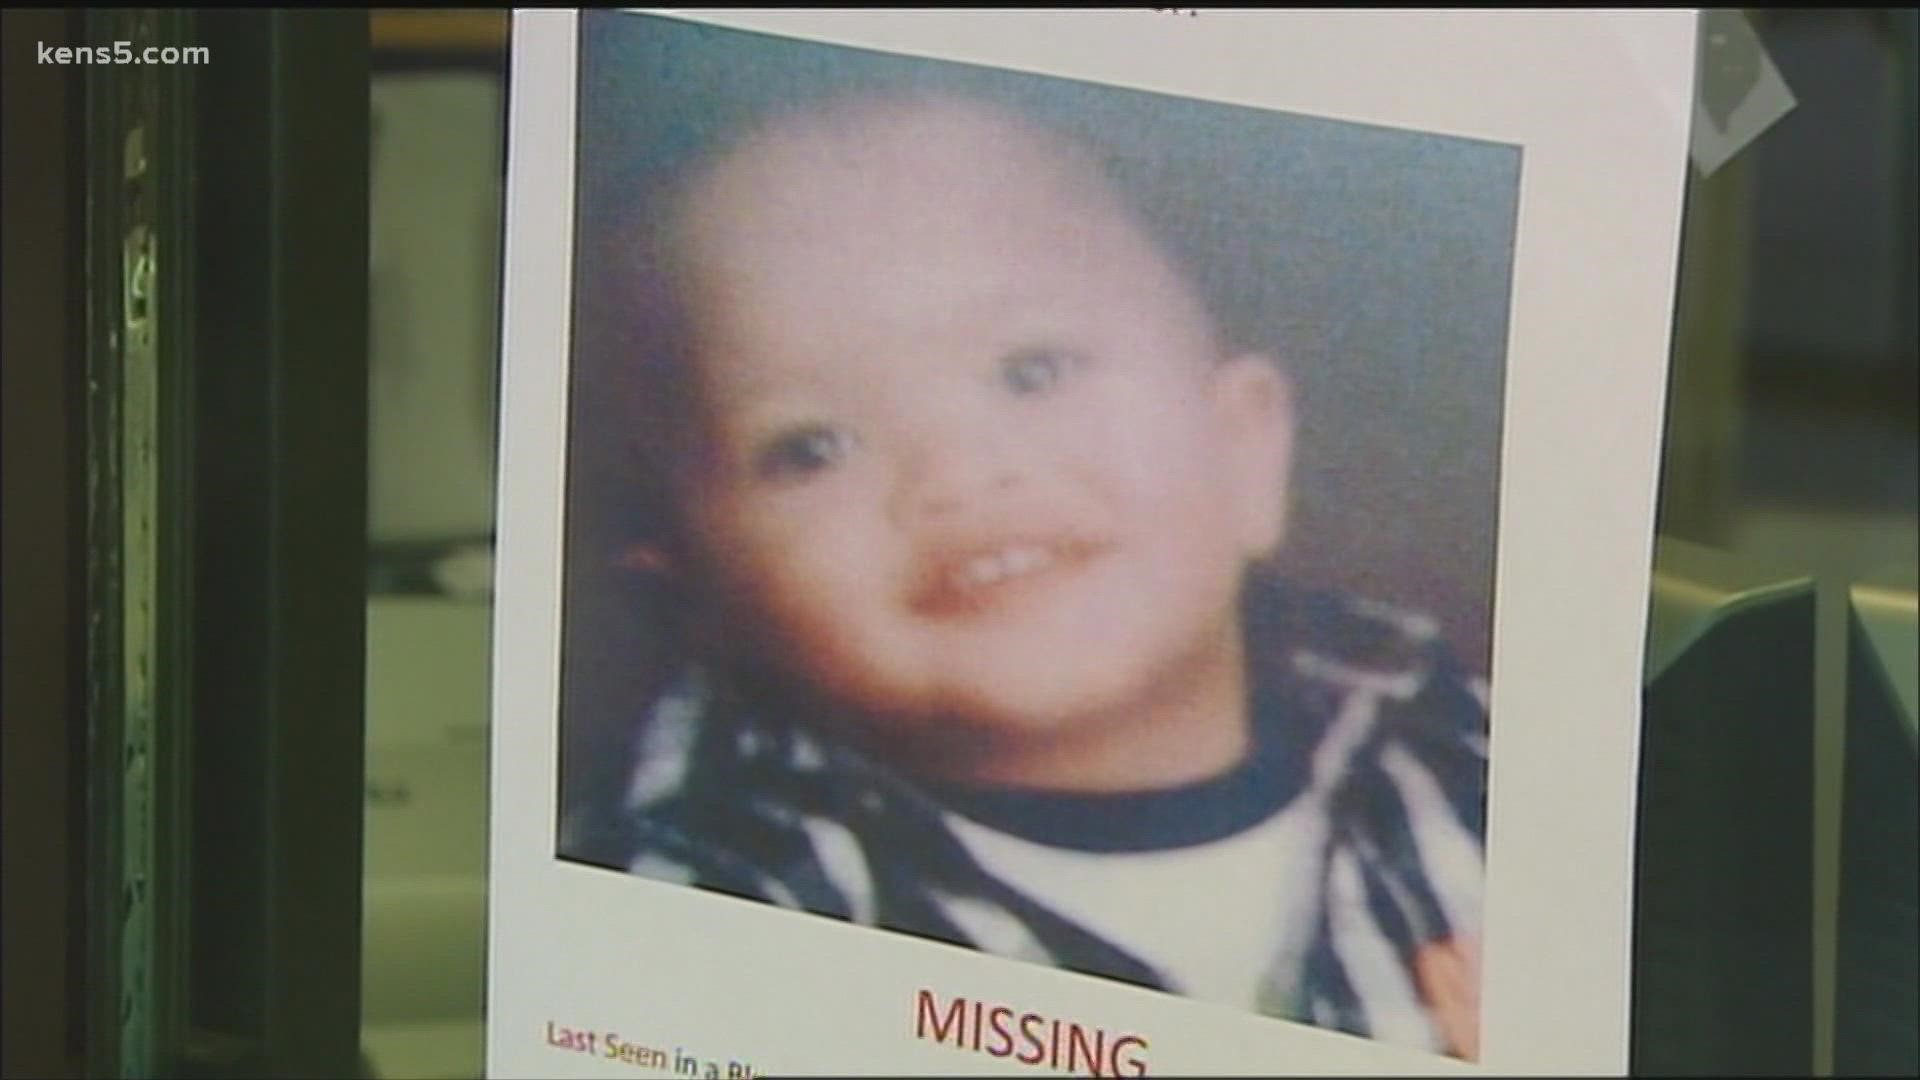 Joshua David was never found. And his grandmother sympathizes with Lina's family as she is still missing.